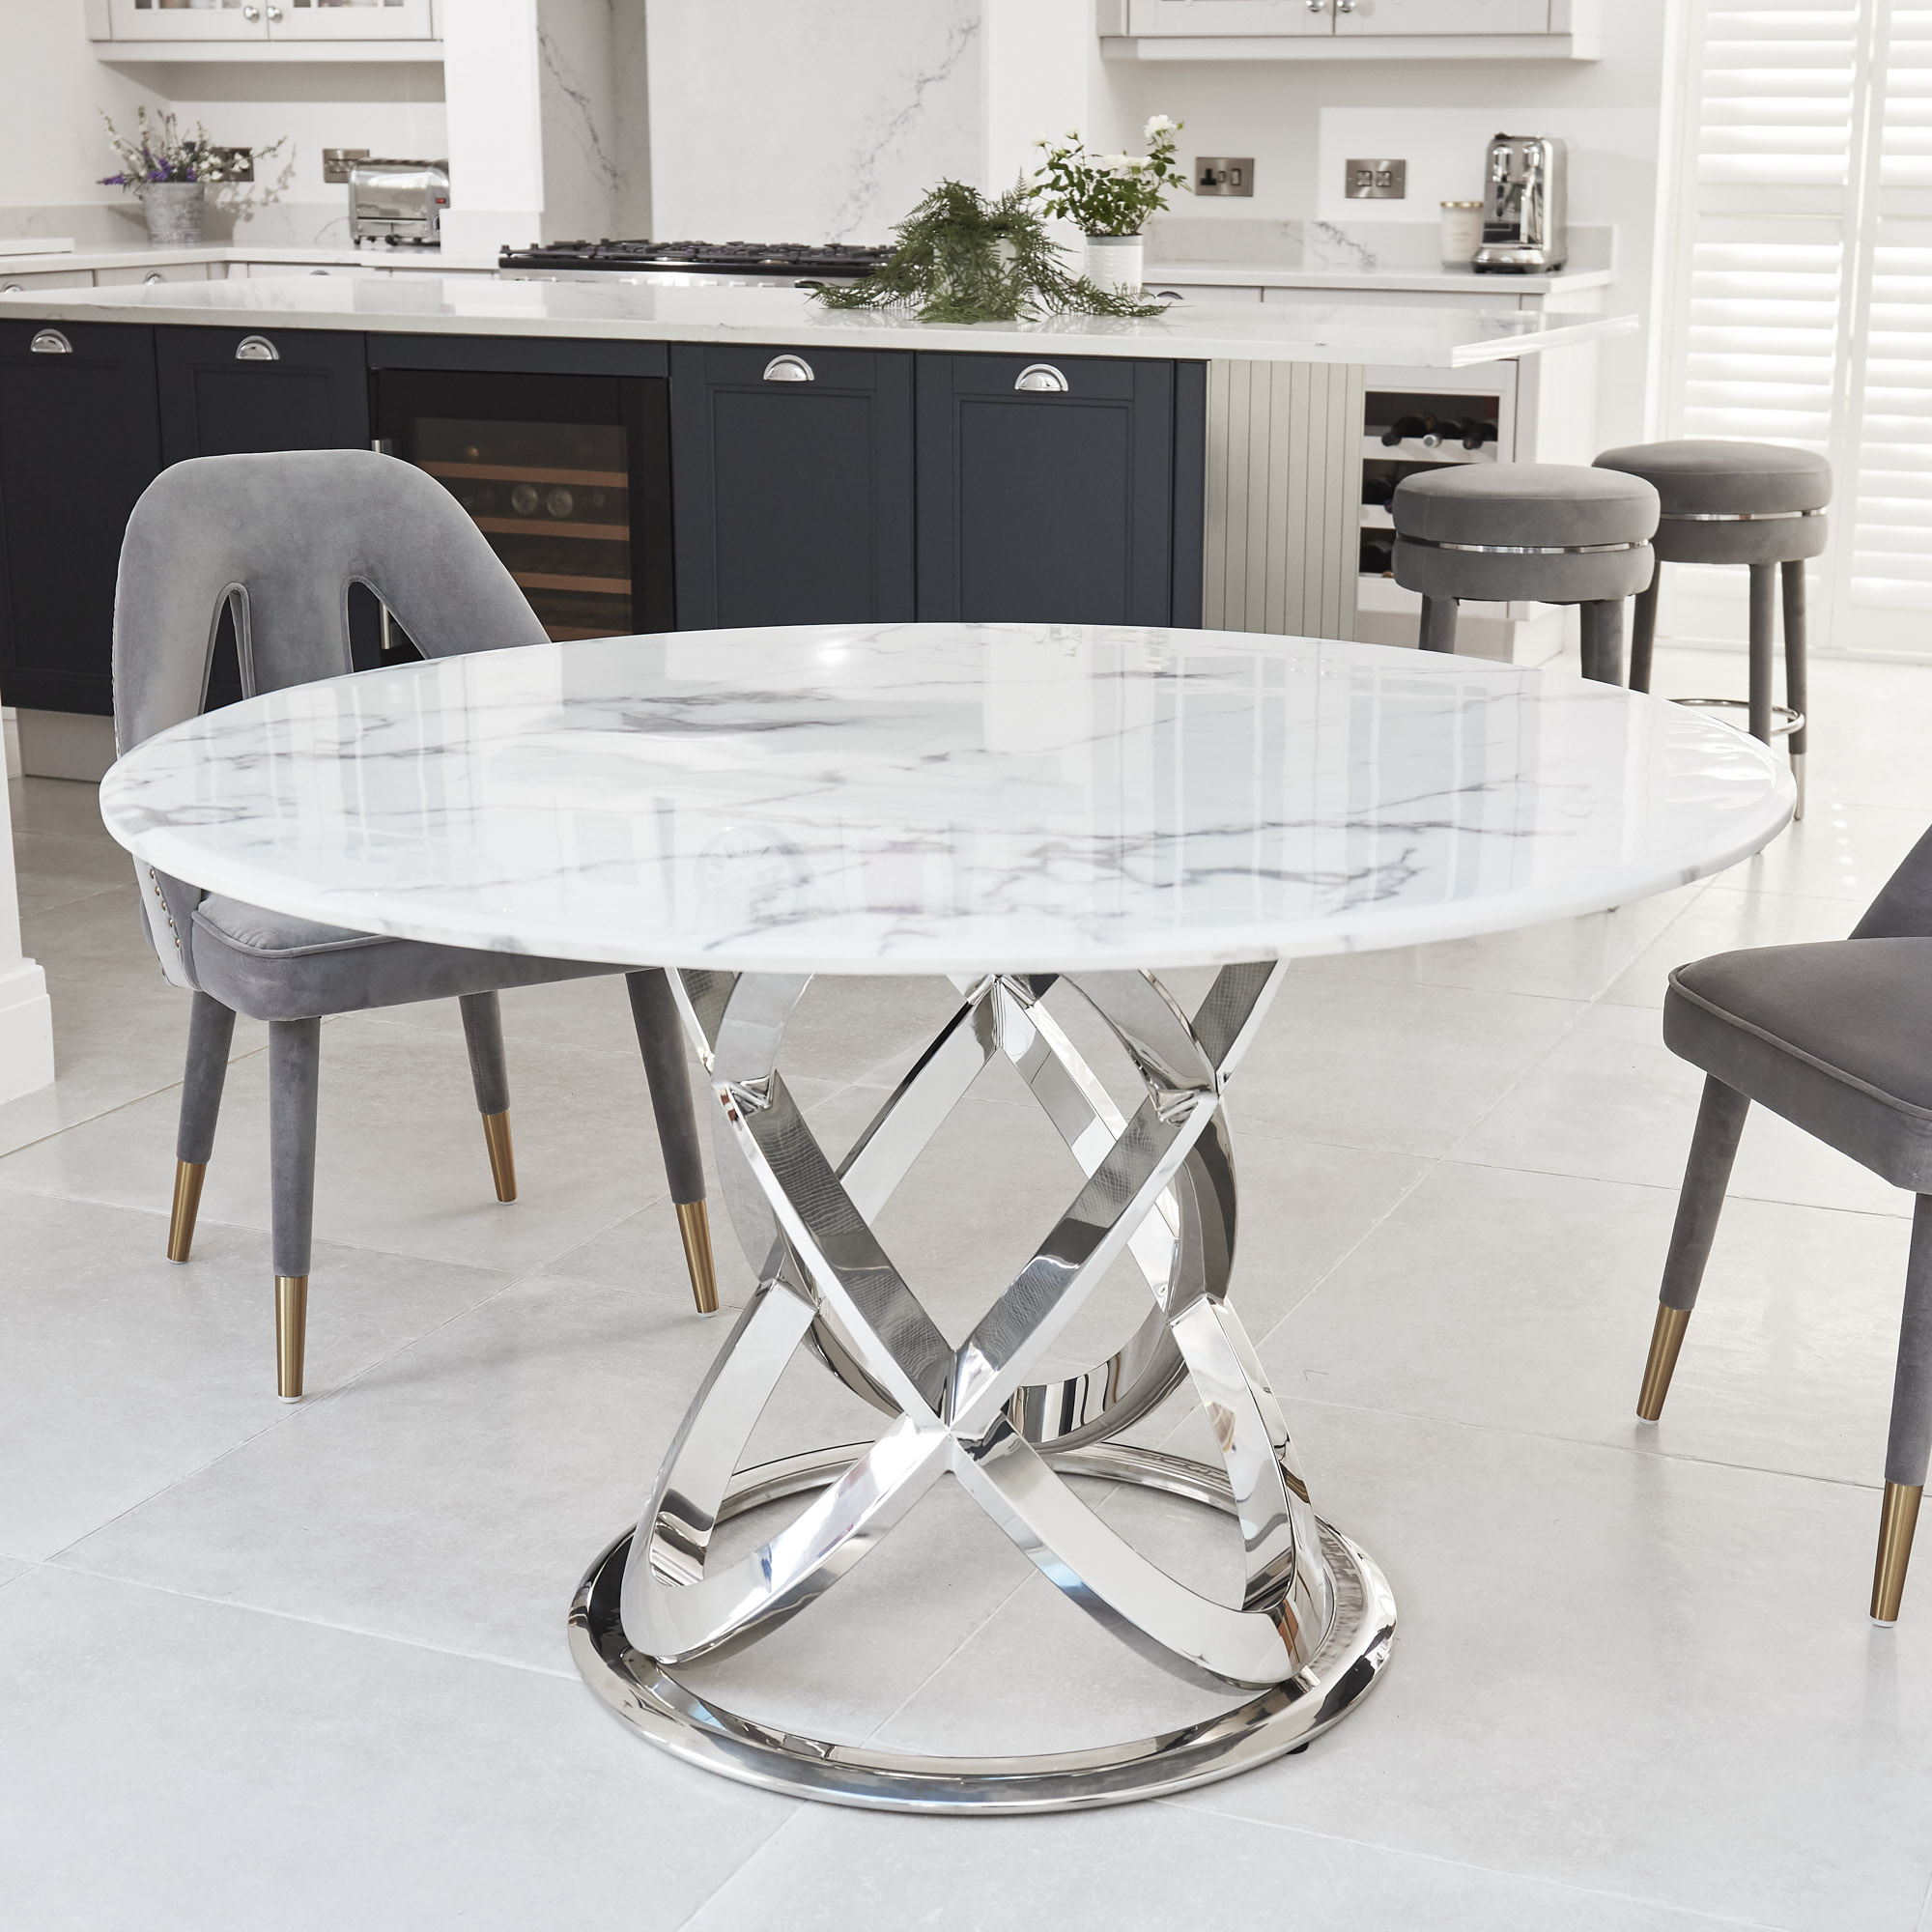 1.3M Pedestal Polished Circular Stainless Steel Dining Table with White Marble Top